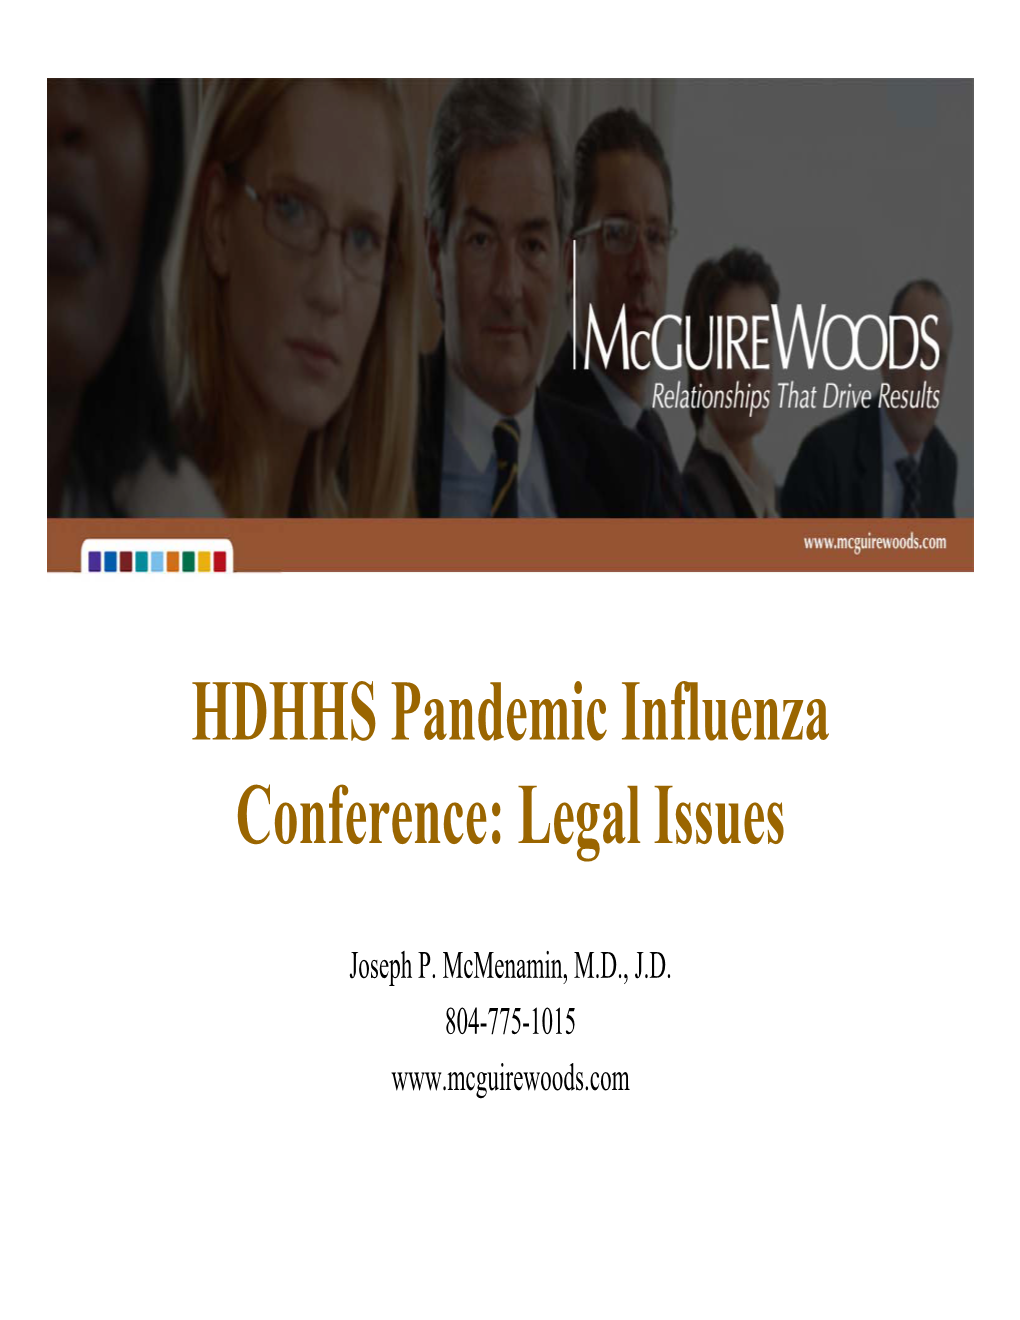 HDHHS Pandemic Influenza Conference: Legal Issues